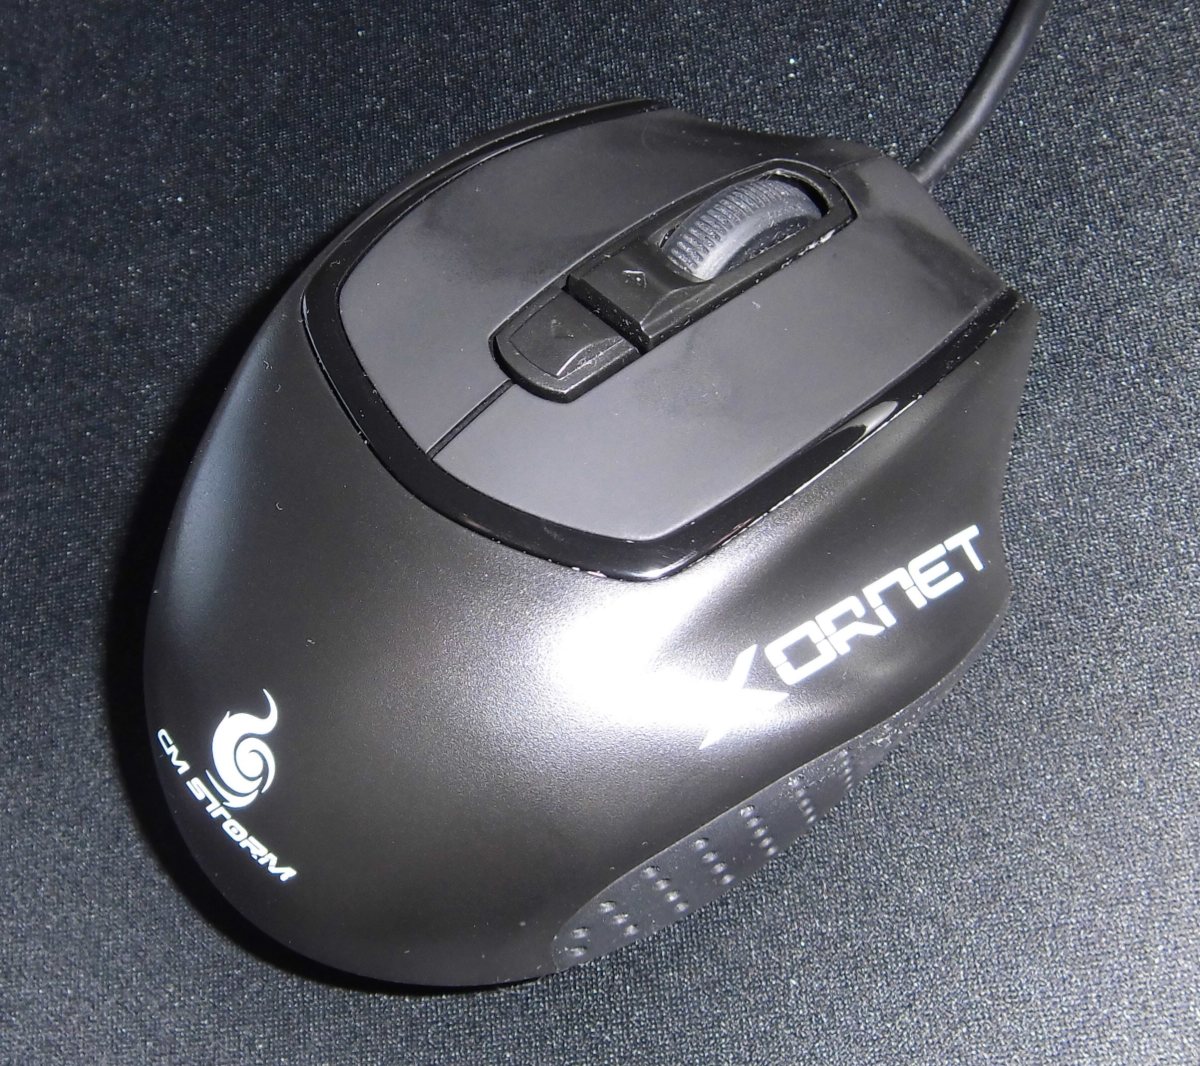 My CM Storm Xornet on a Roccat Taito mouse pad. The handy ring finger rest makes this mouse perfect for claw gripping.